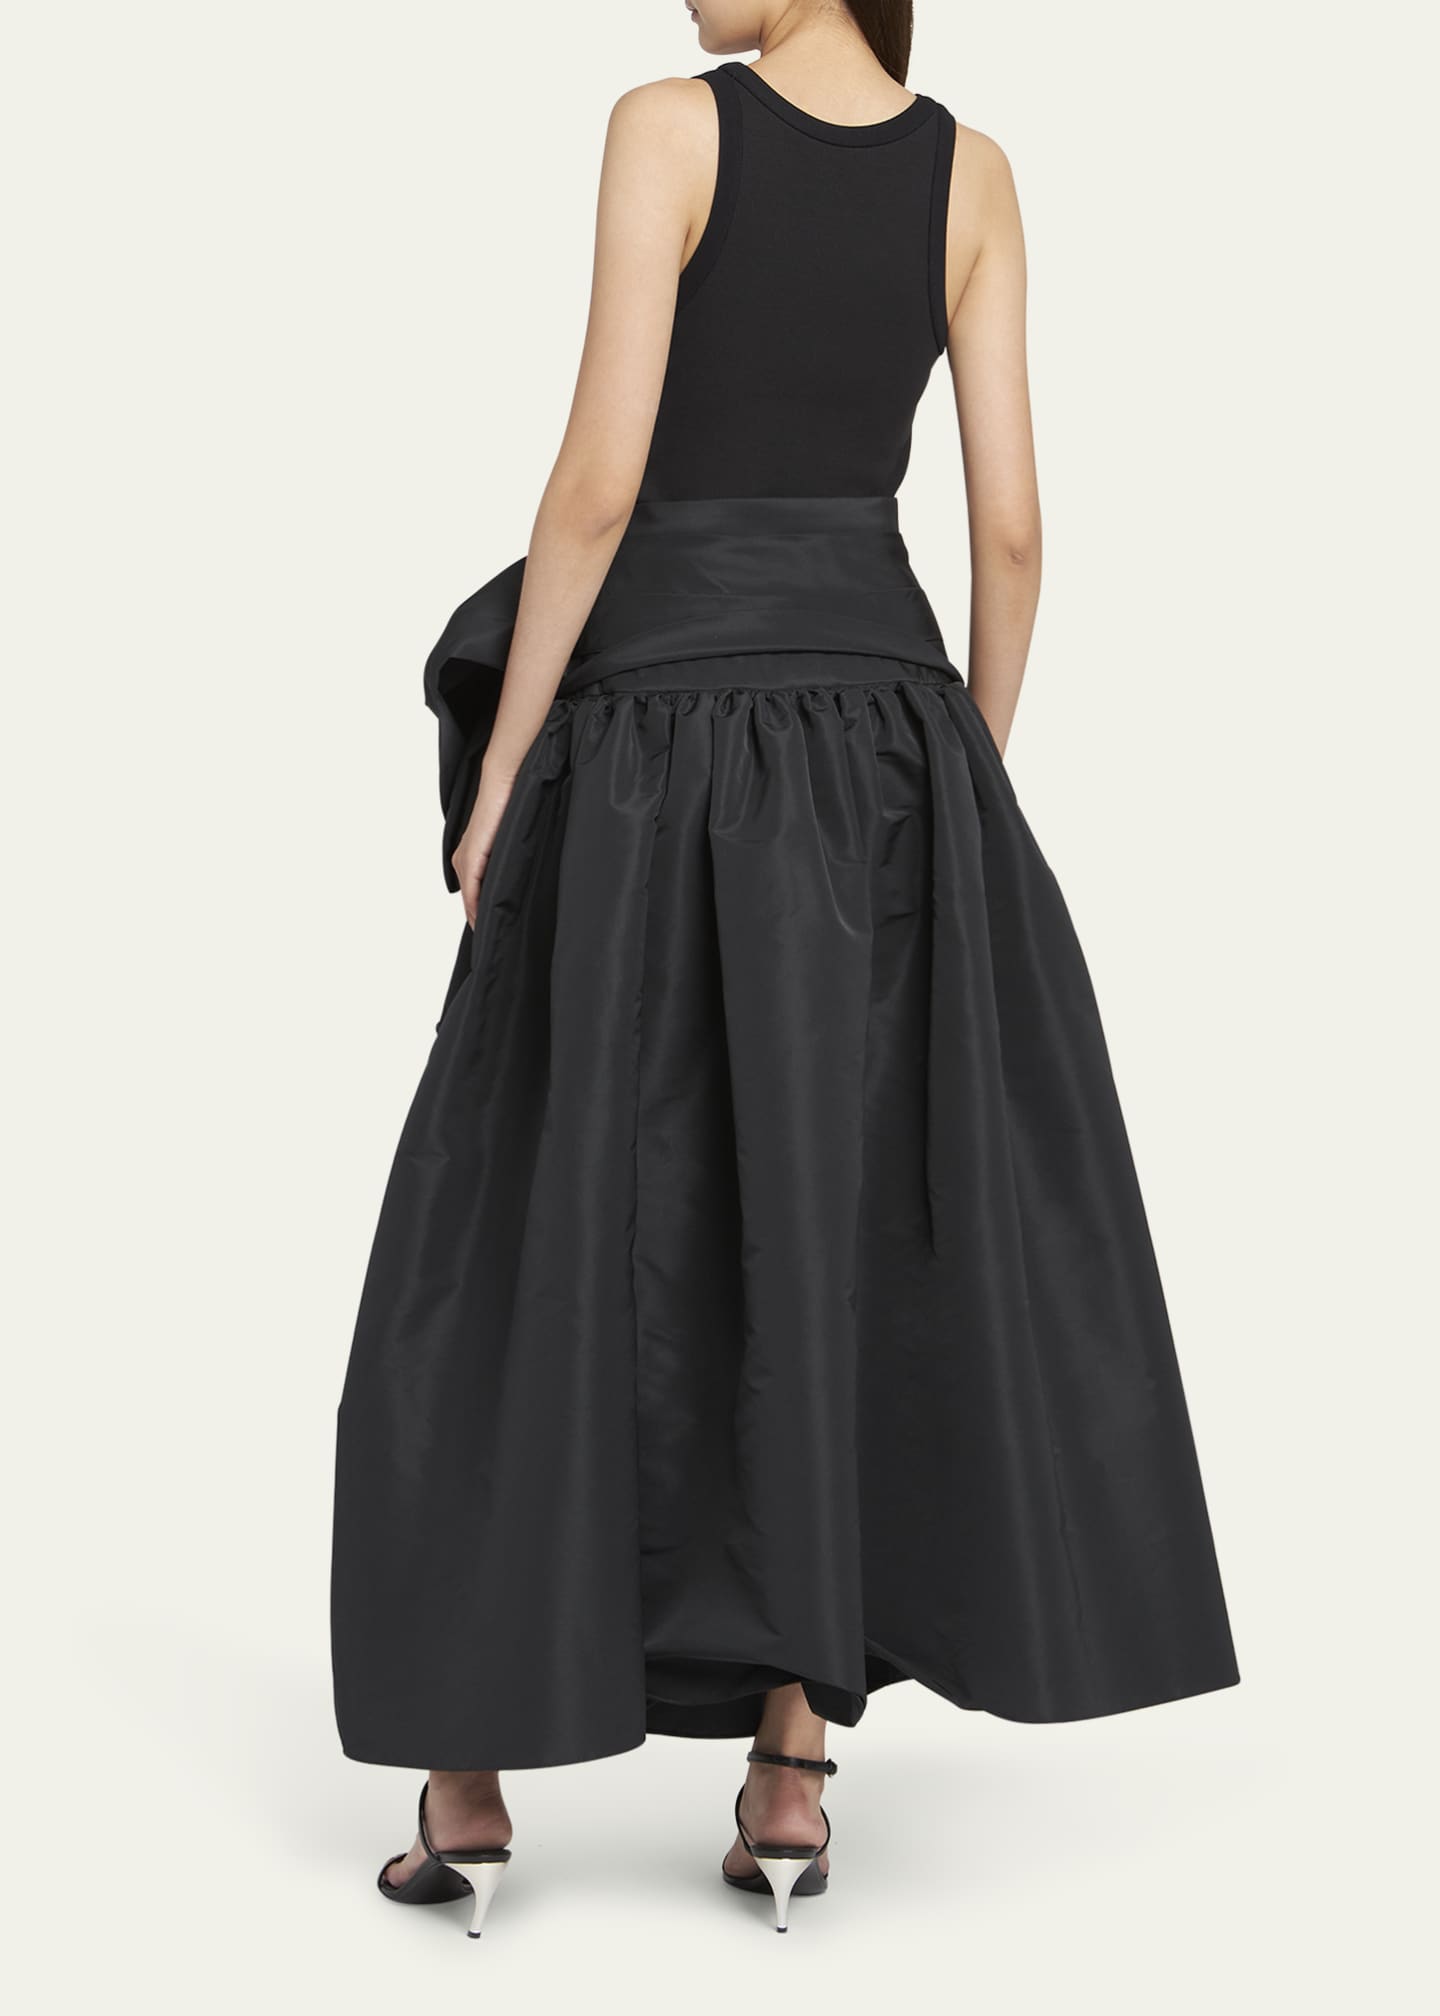 Alexander McQueen Ruched Full Skirt Gown with Bow Detail - Bergdorf Goodman